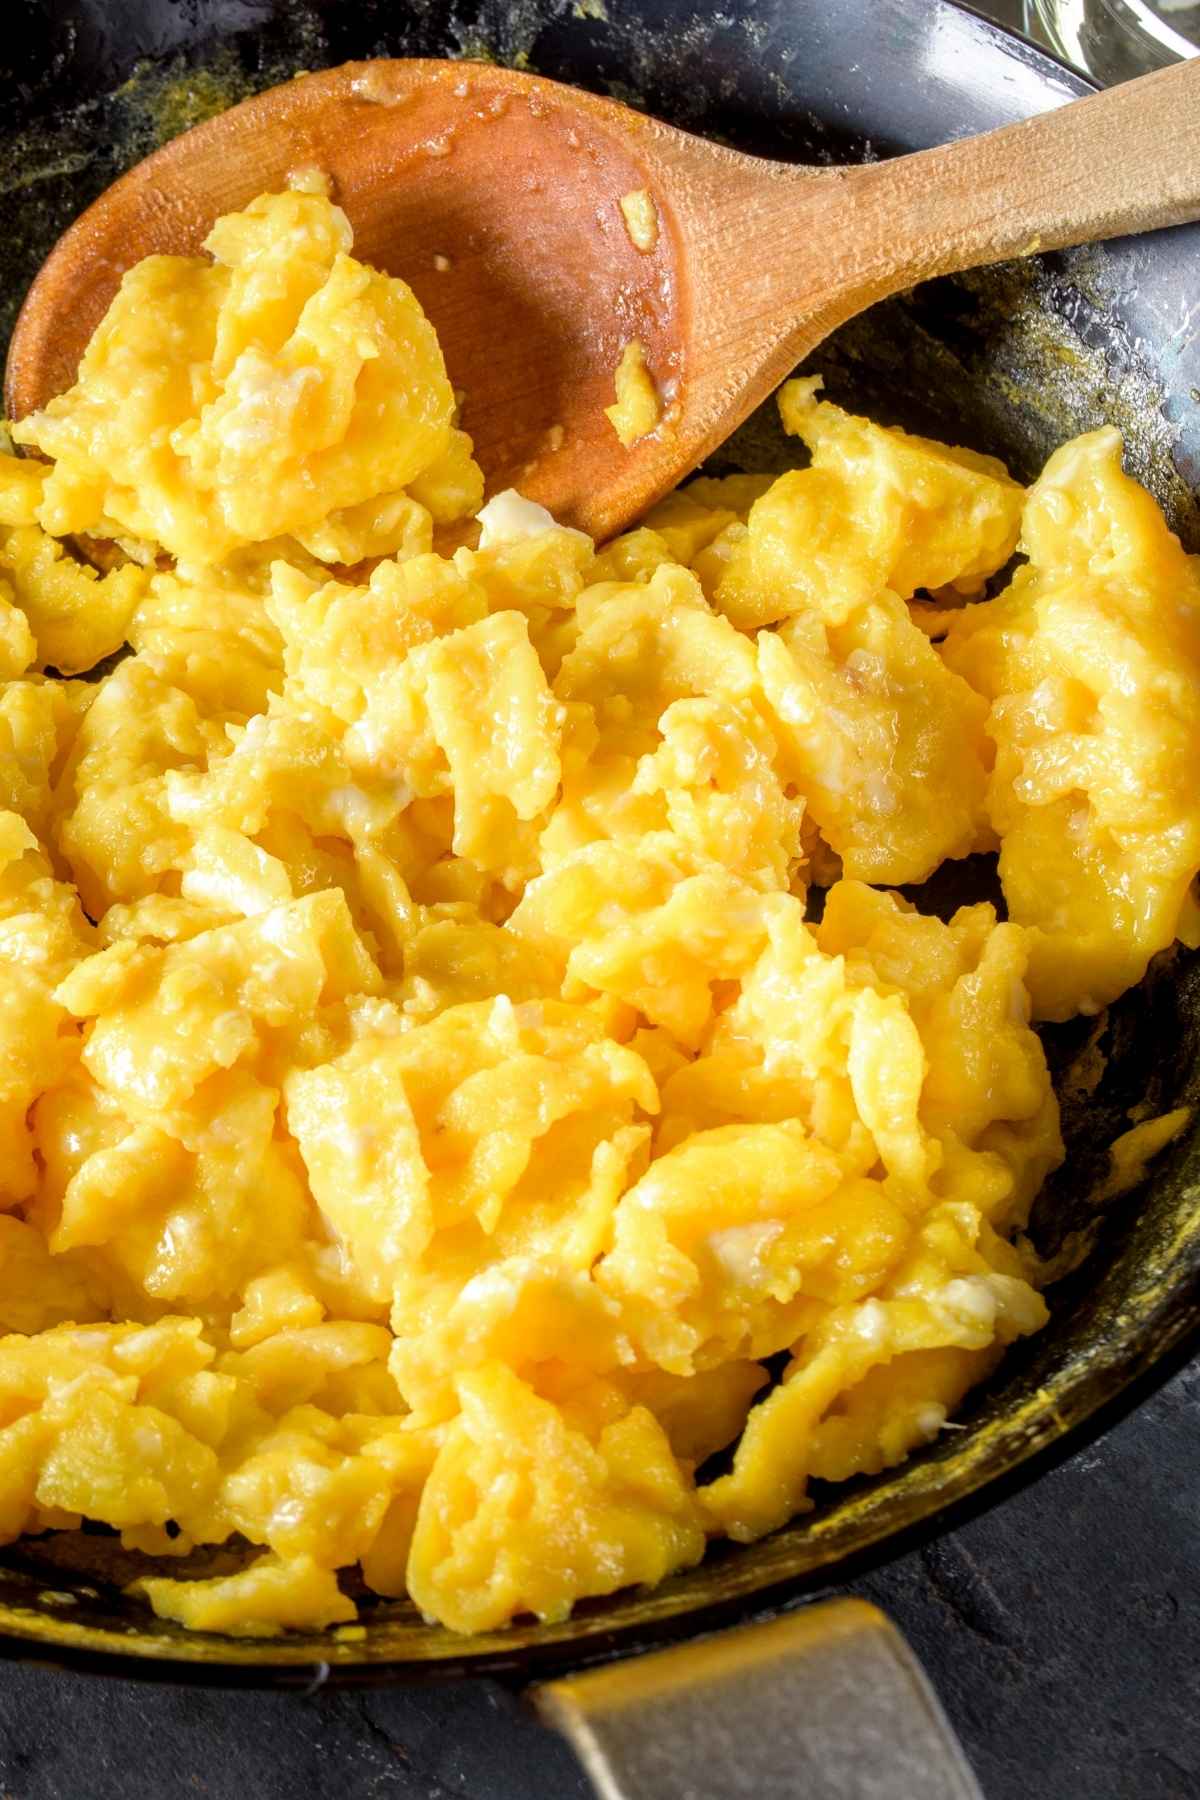 Skillet with scrambled eggs.